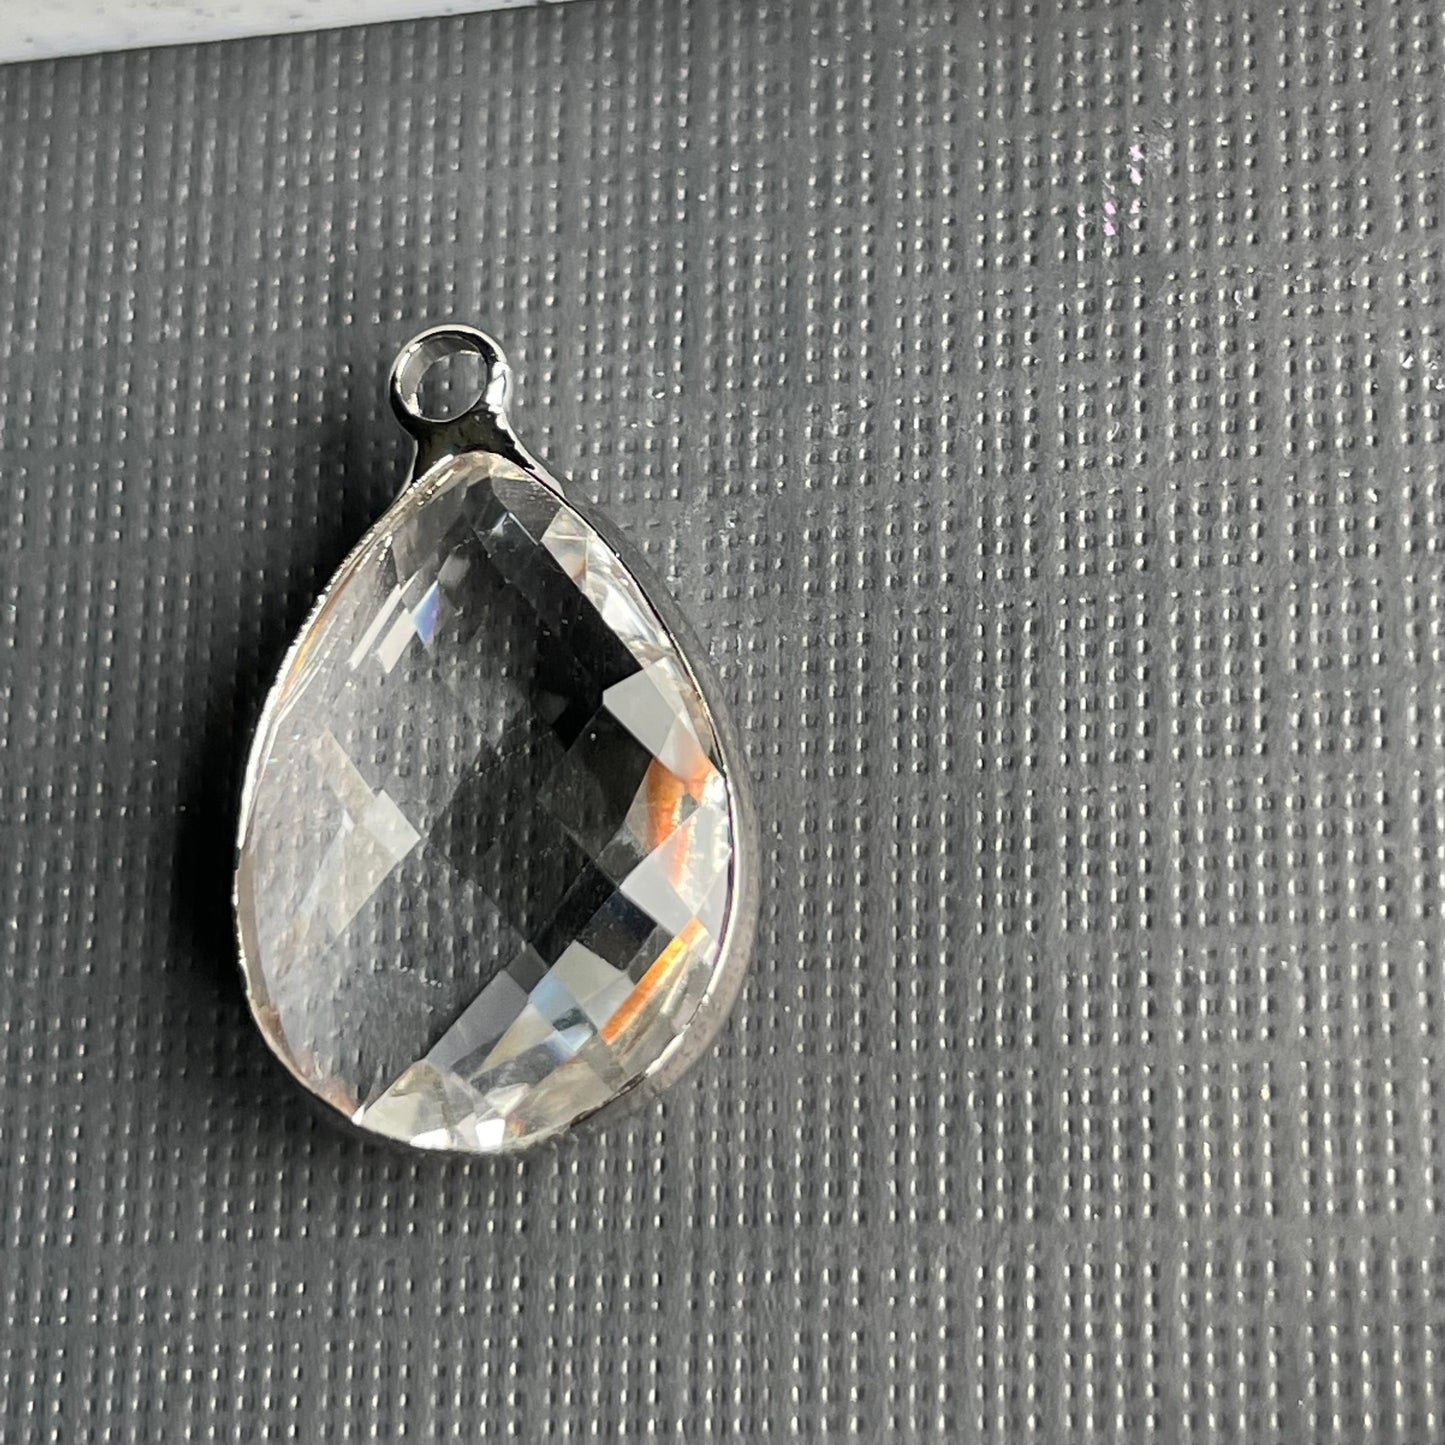 Faceted glass teardrop 13mm x 18mm - 6 pieces